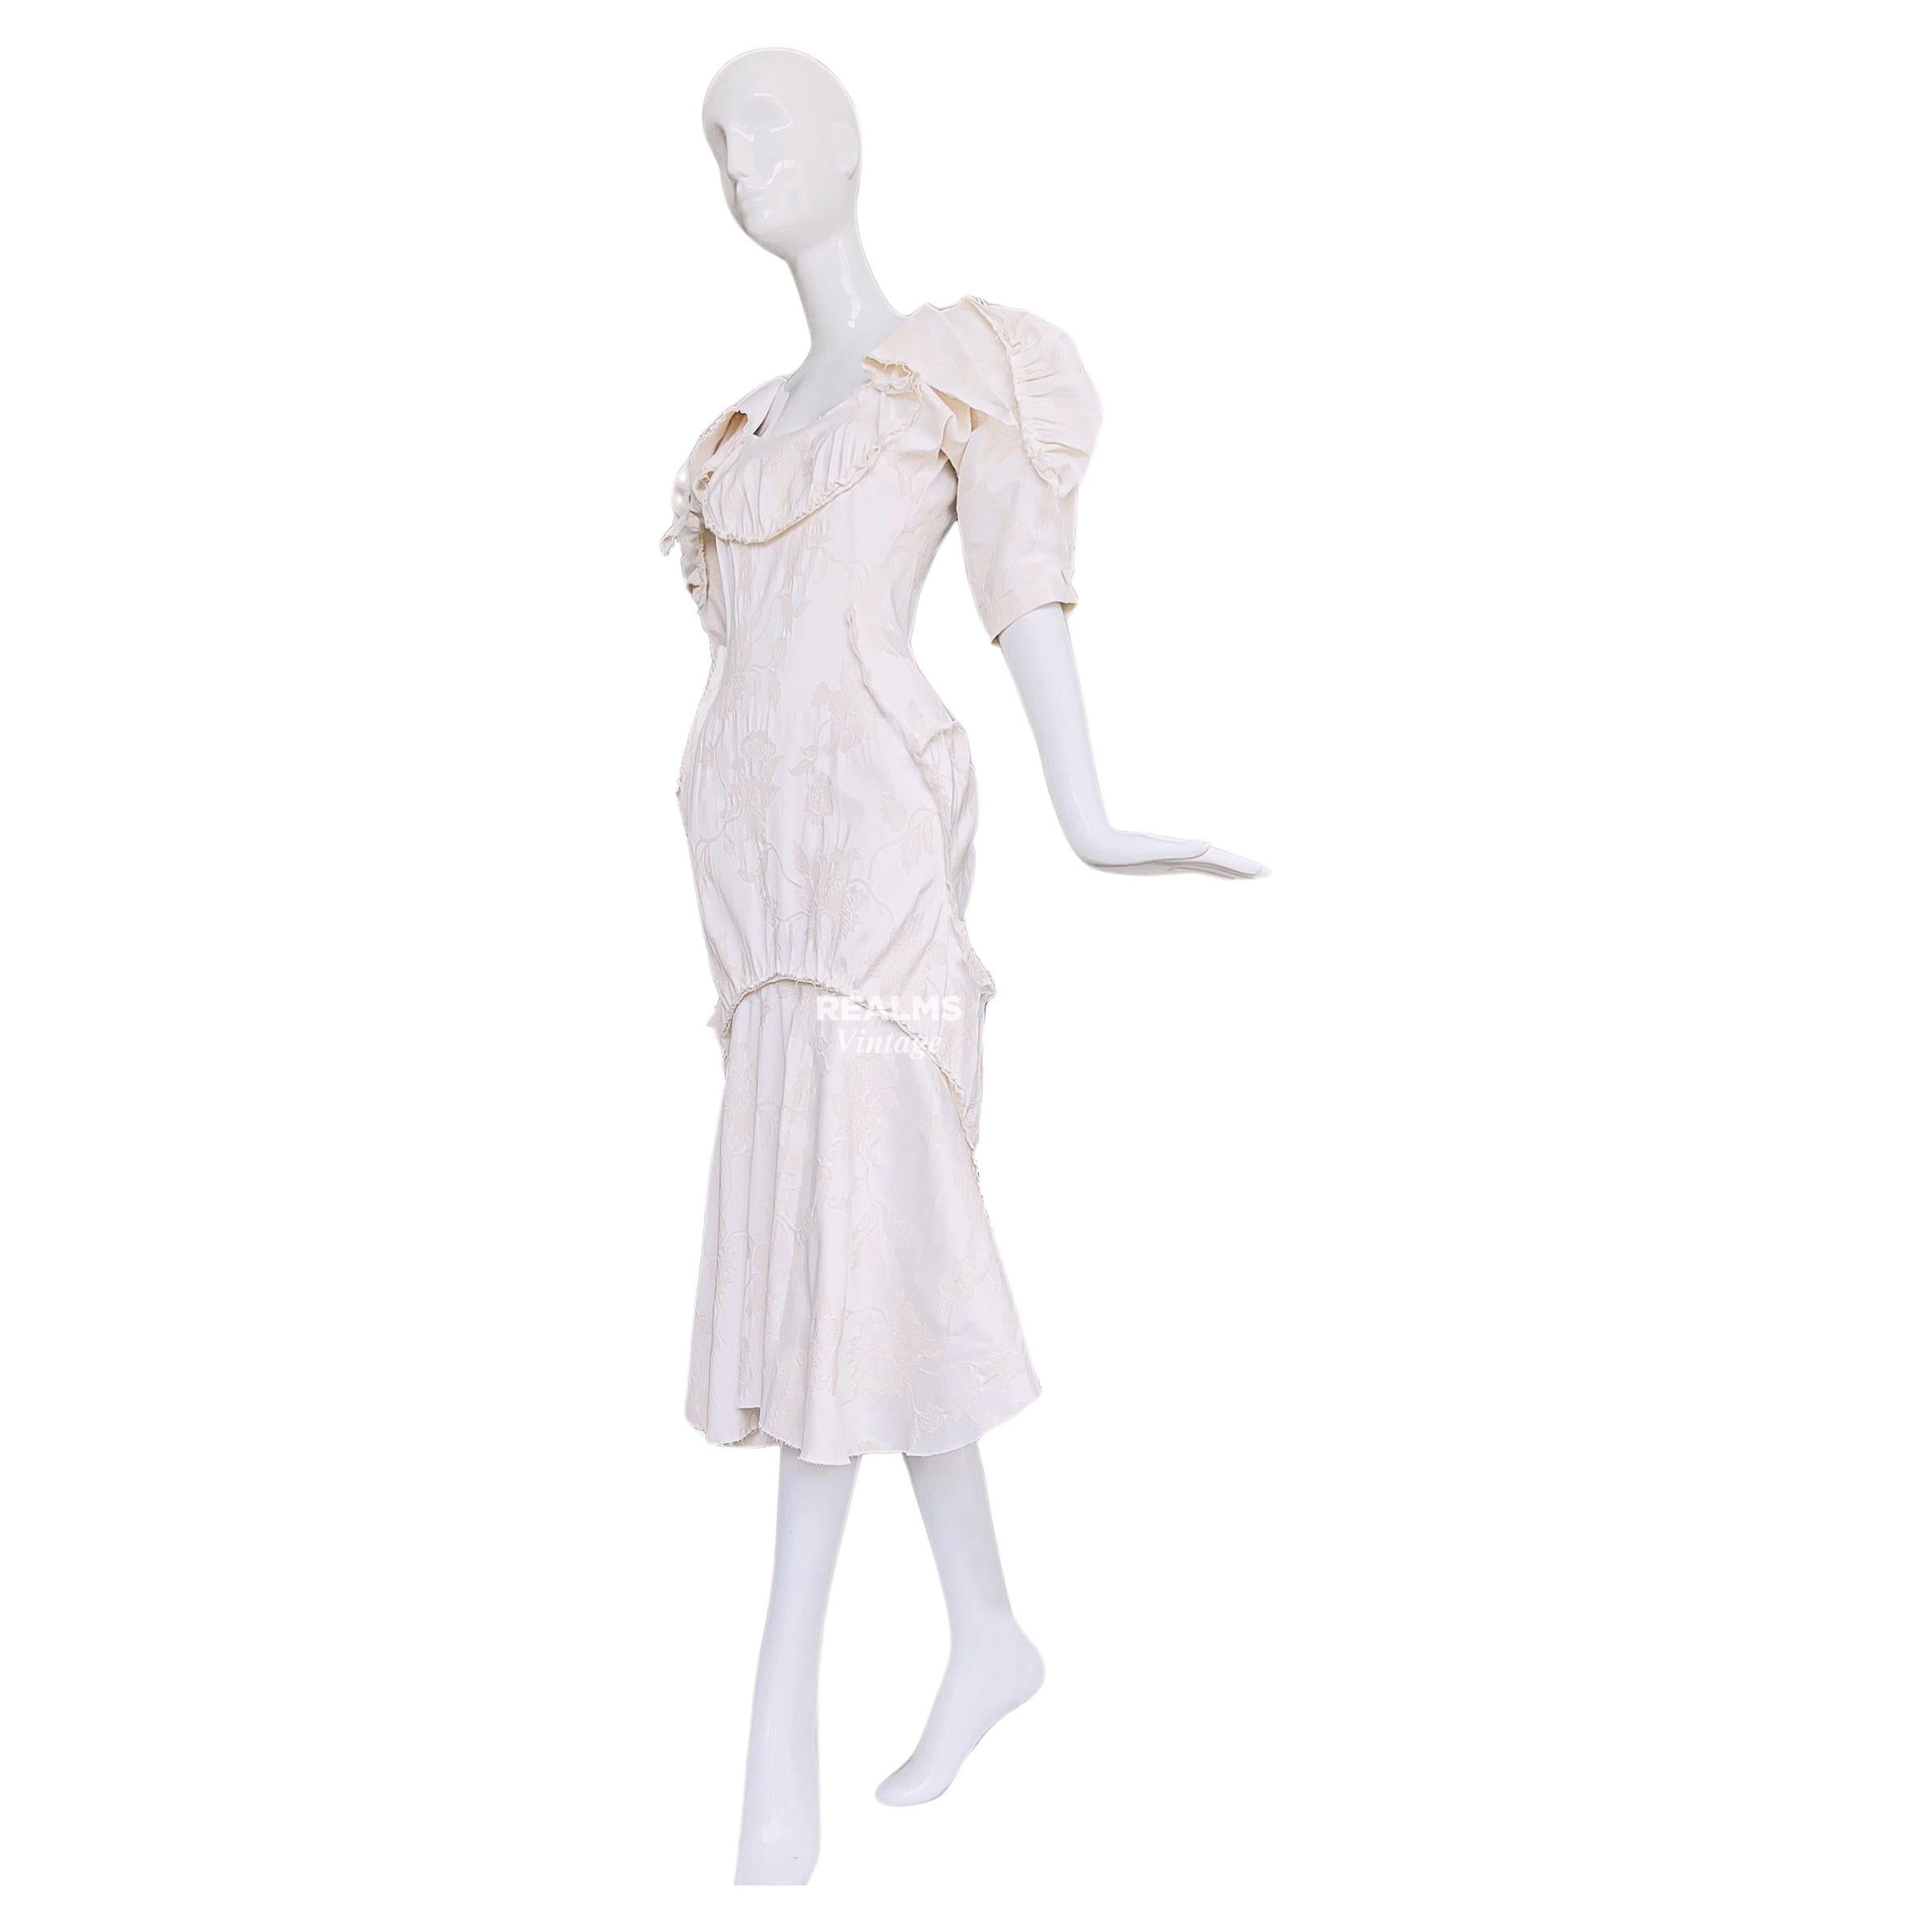 Vivienne Westwood SS 2020 Cocoon Dress Stunning Gown For Sale